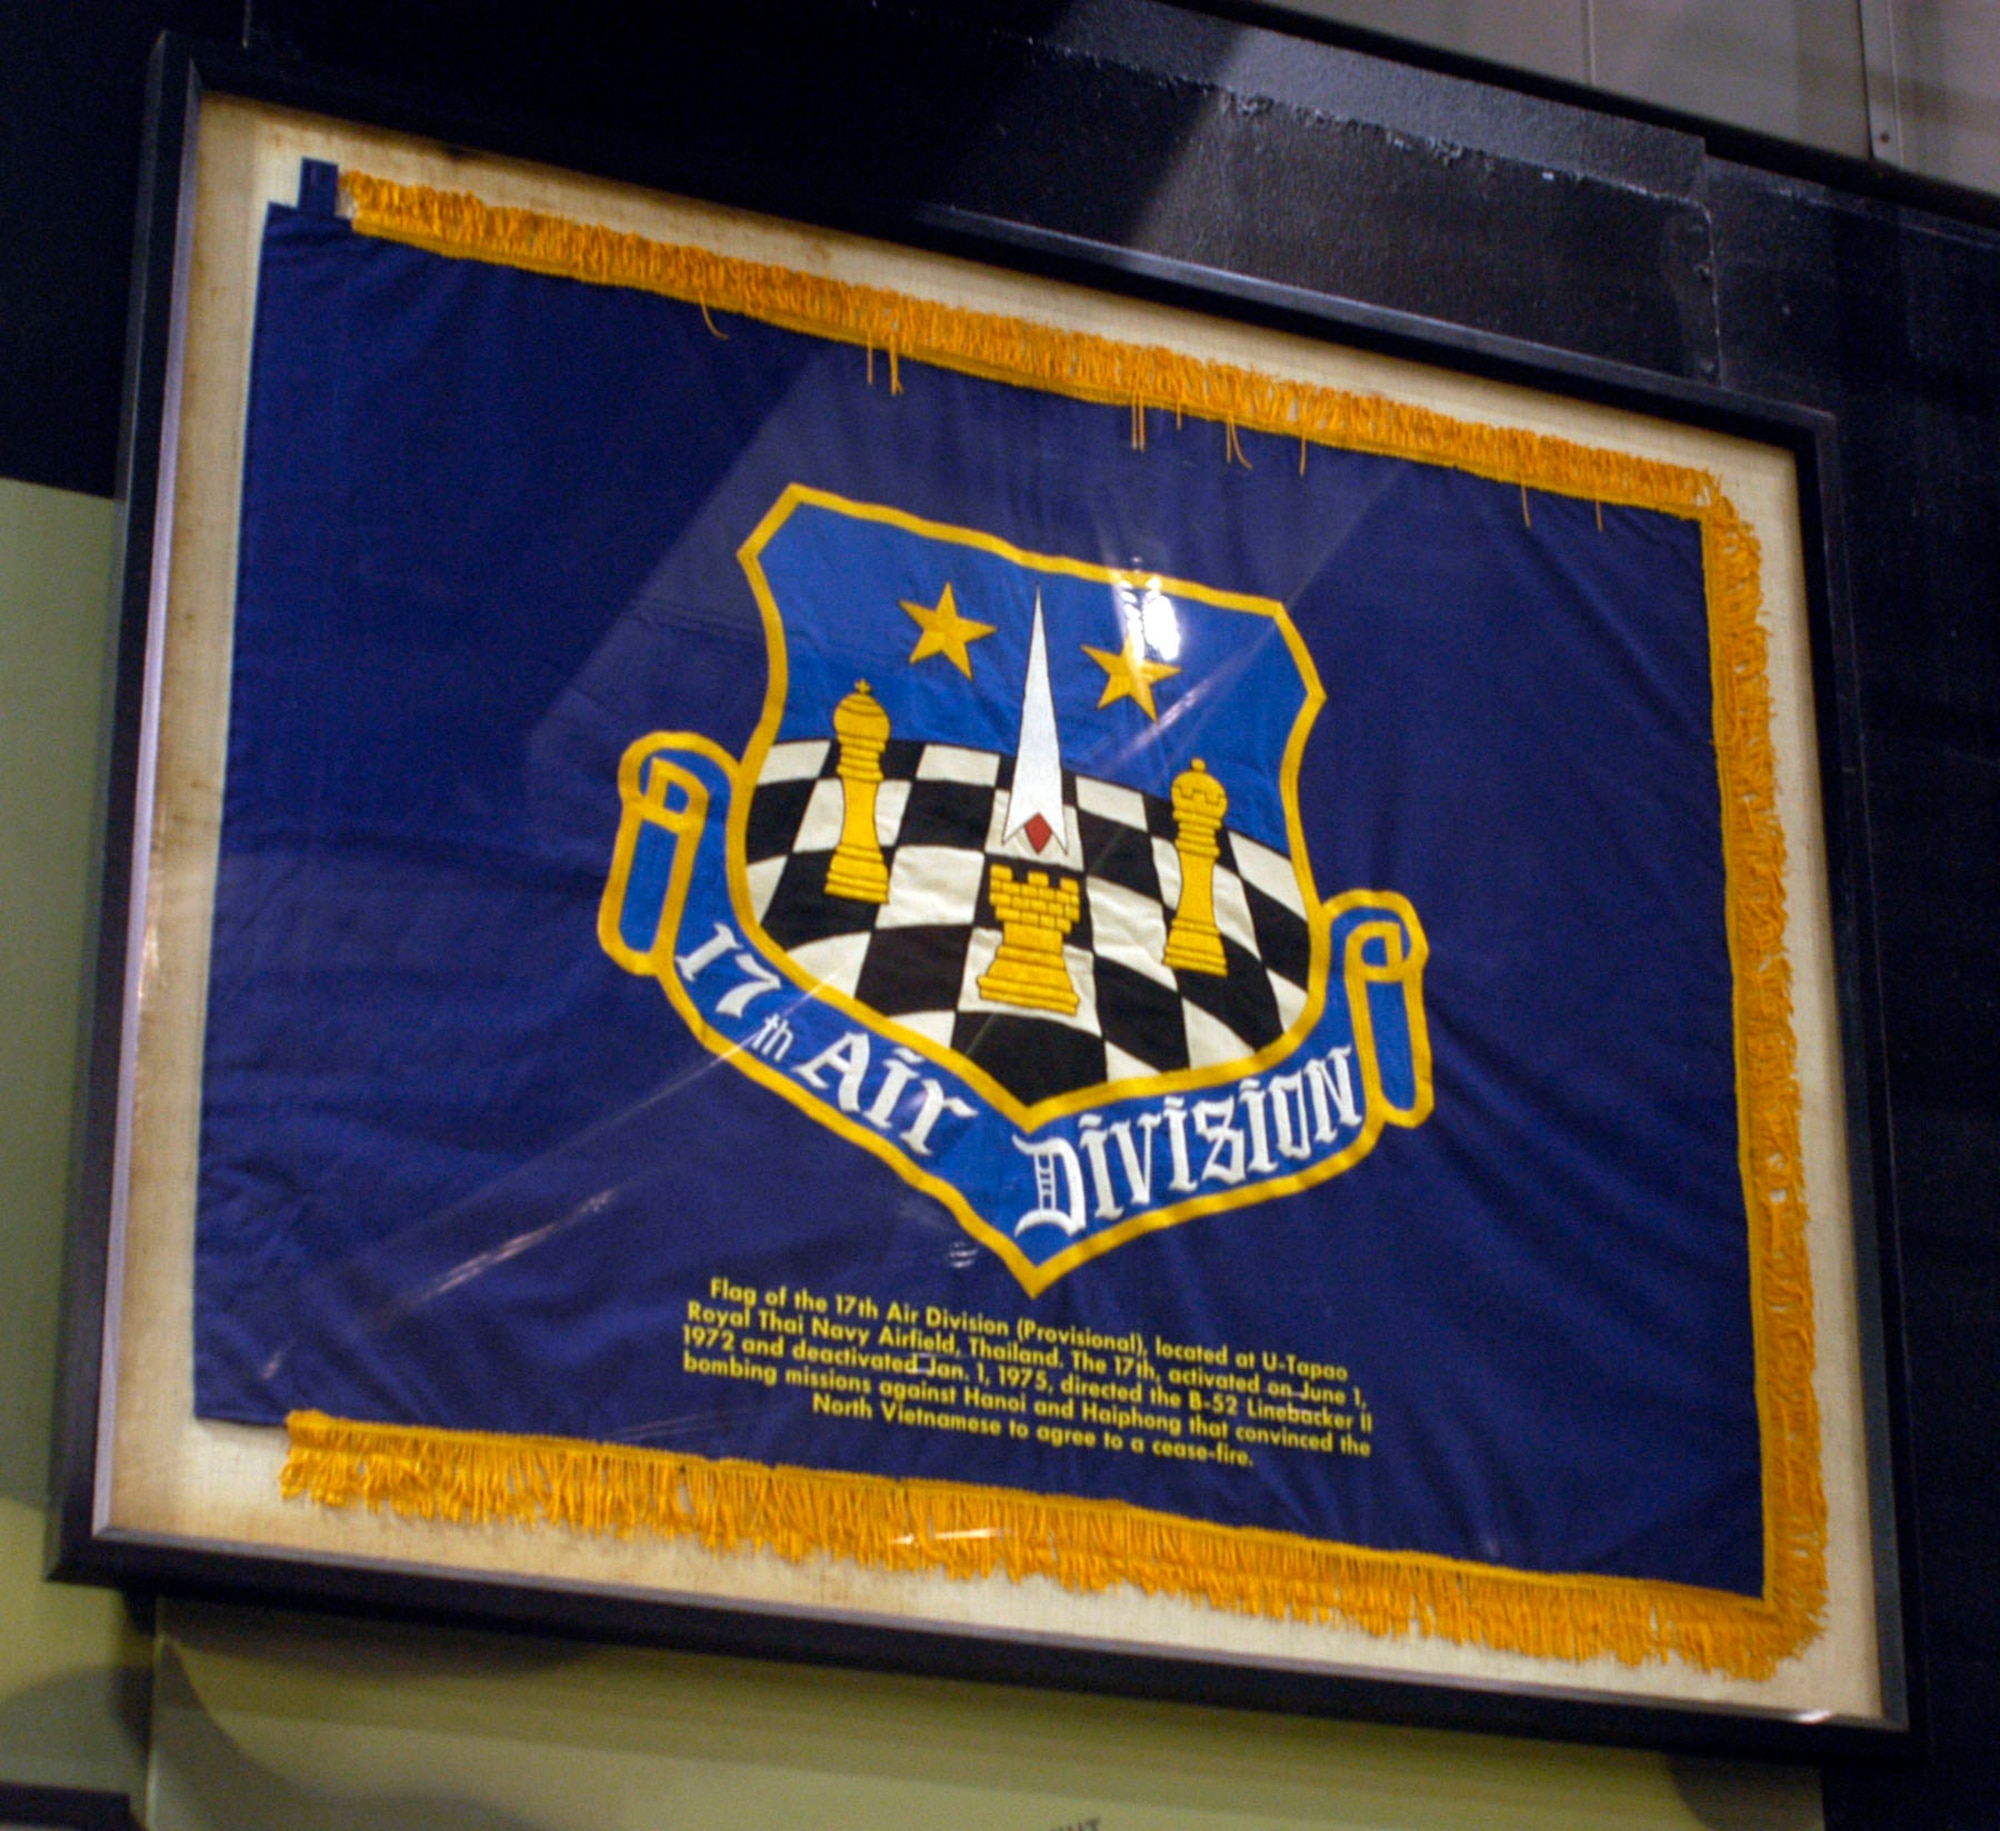 DAYTON, Ohio - Flag of the 17th Air Division (Provisional), located at U-Tapao Royal Thai Navy Airfield, Thailand. The 17th, activated on June 1,1972, and deactivated Jan. 1, 1975, directed the B-52 Linebacker II bombing missions against Hanoi and Haiphong that convinced the North Vietnamese to agree to a cease-fire. The flag is on display in the Southeast Asia War Gallery at the National Museum of the U.S. Air Force. (U.S. Air Force photo)